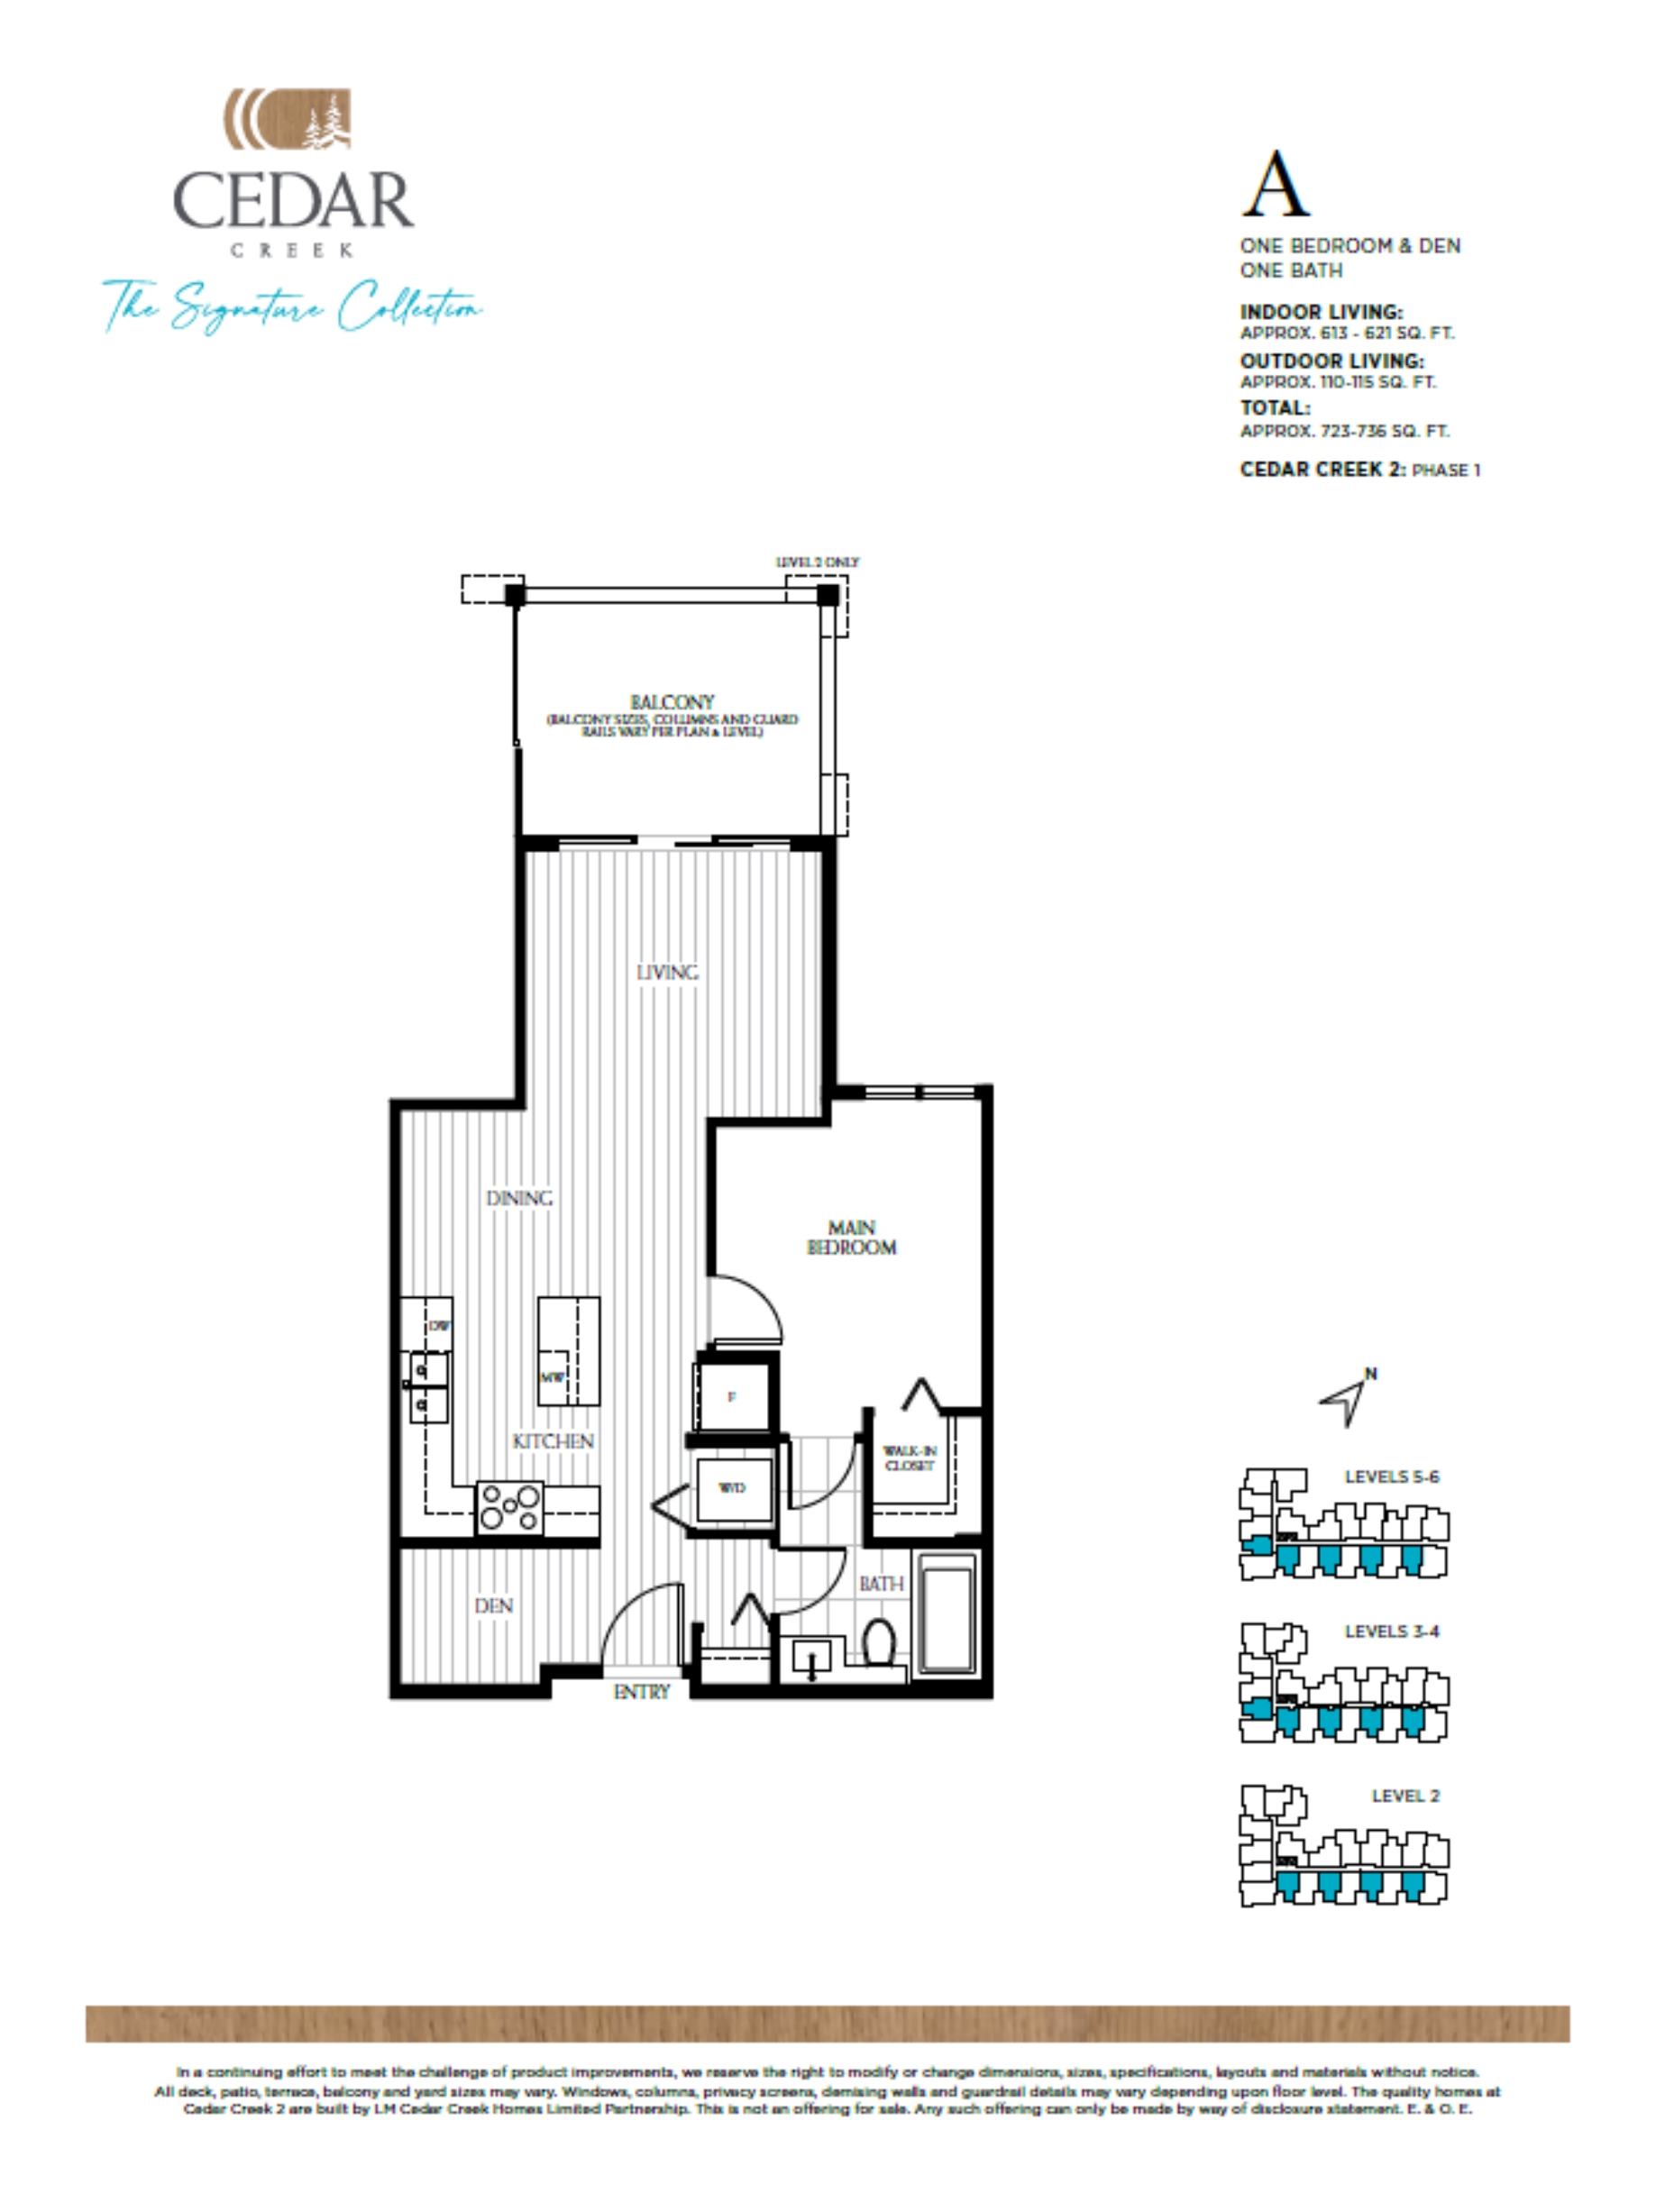 A Floor Plan of Cedar Creek (Signature Collection) Condos with undefined beds